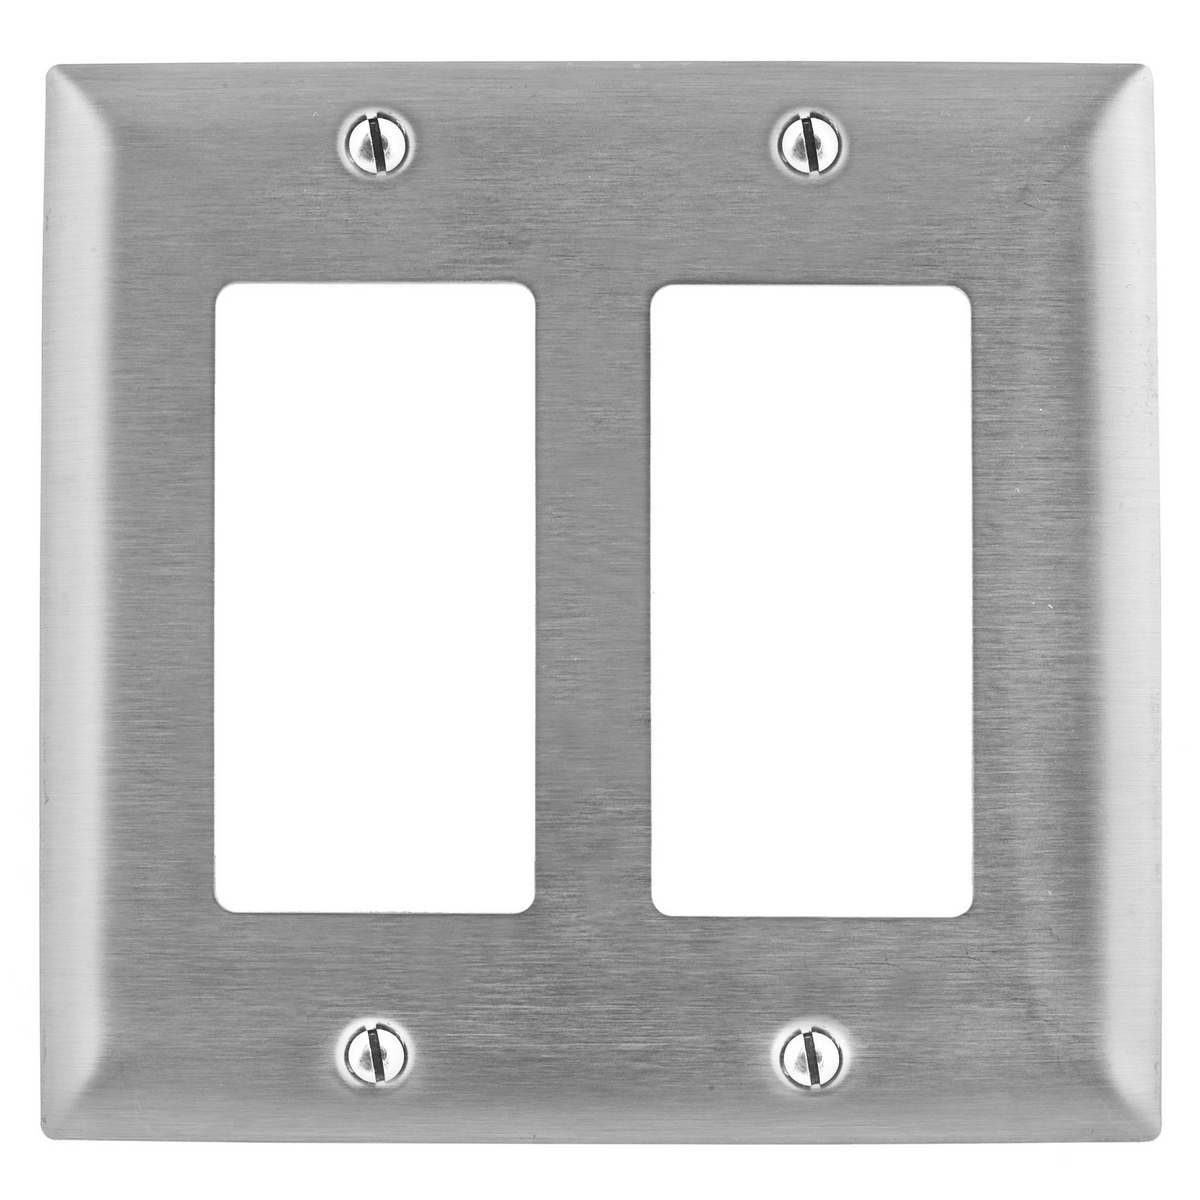 Hubbell Wiring Systems Ss211 302 304 Stainless Steel Combination Wall Plate 3 Gang 2 Duplex 1 Blank 6 13 32 Width X 4 1 2 Height X 1 32 Thick Amazon Com Industrial Scientific